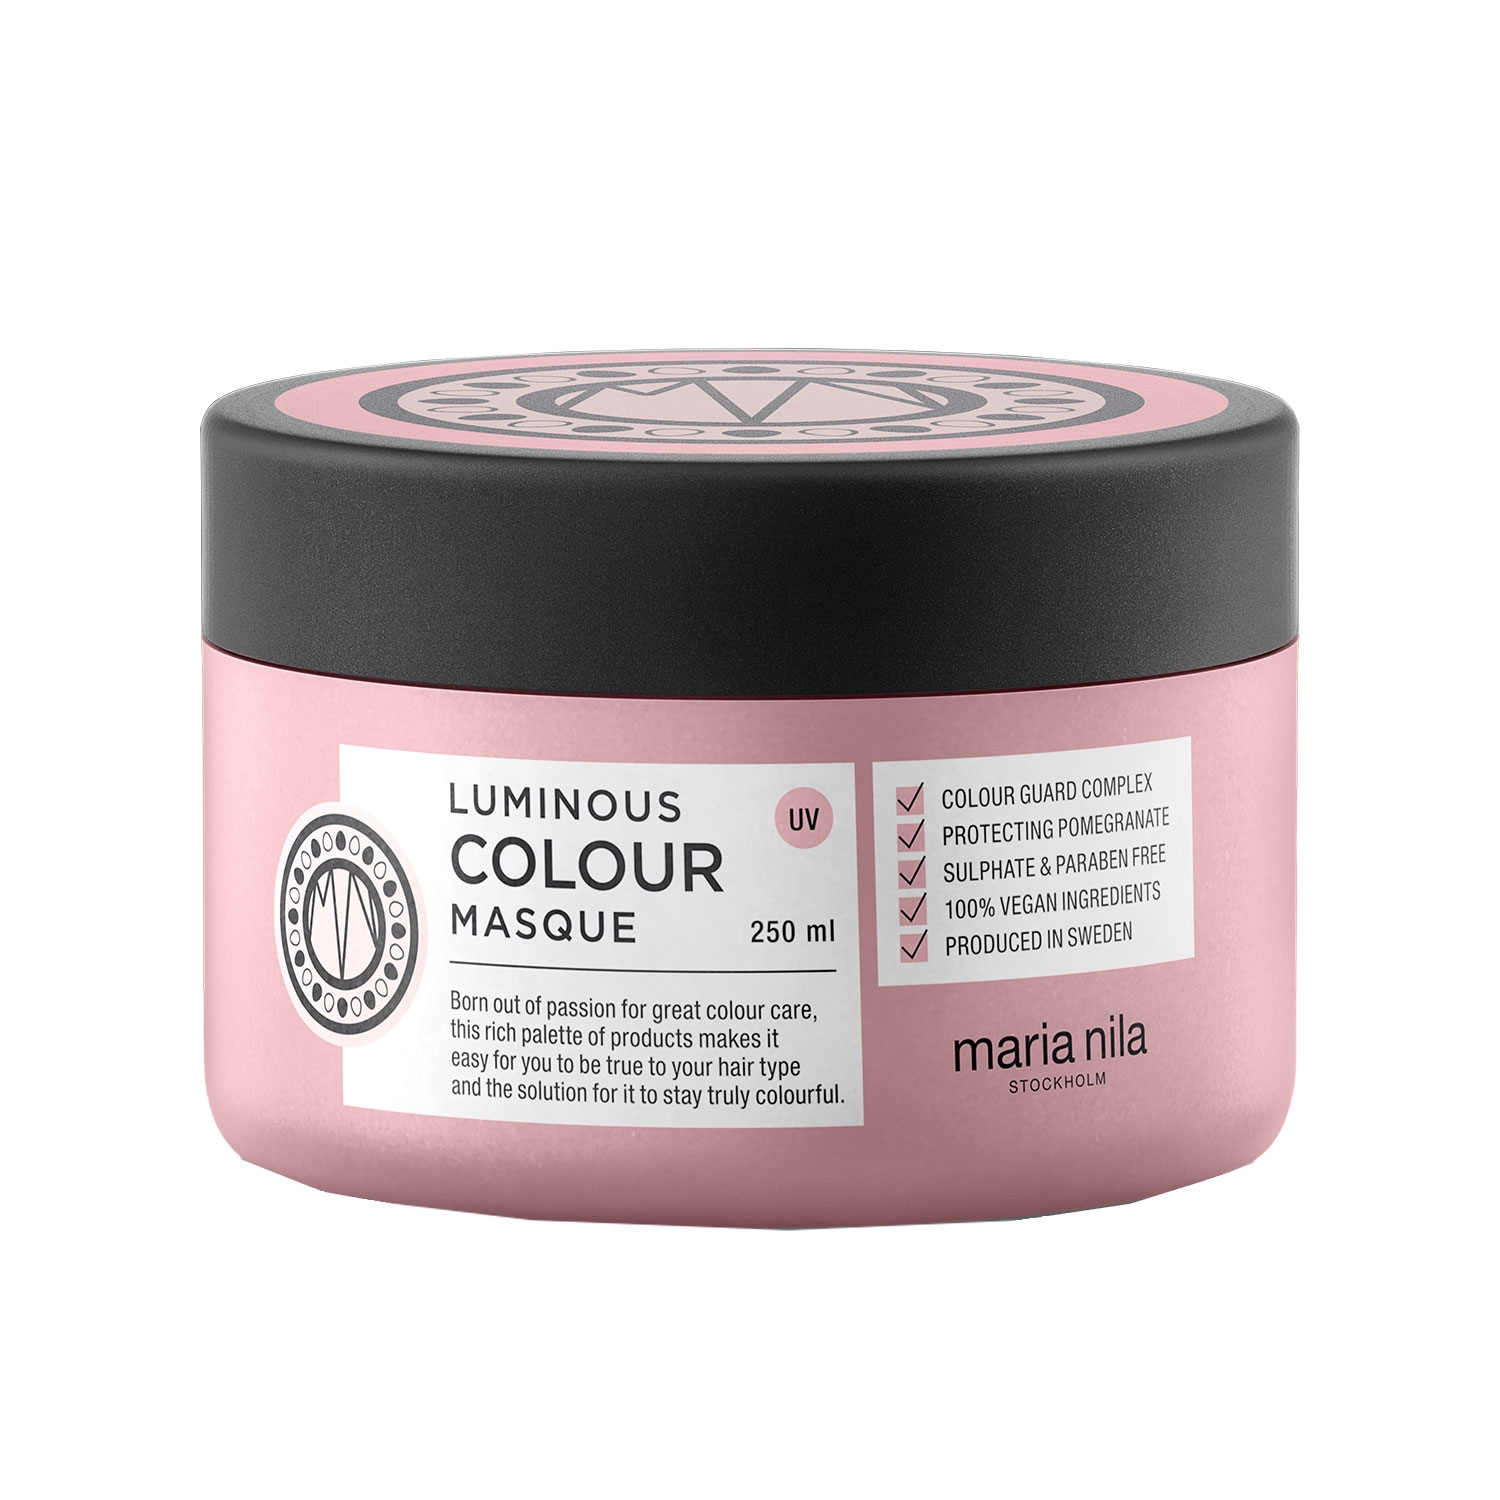 Product image from Care & Style - Luminous Colour Masque